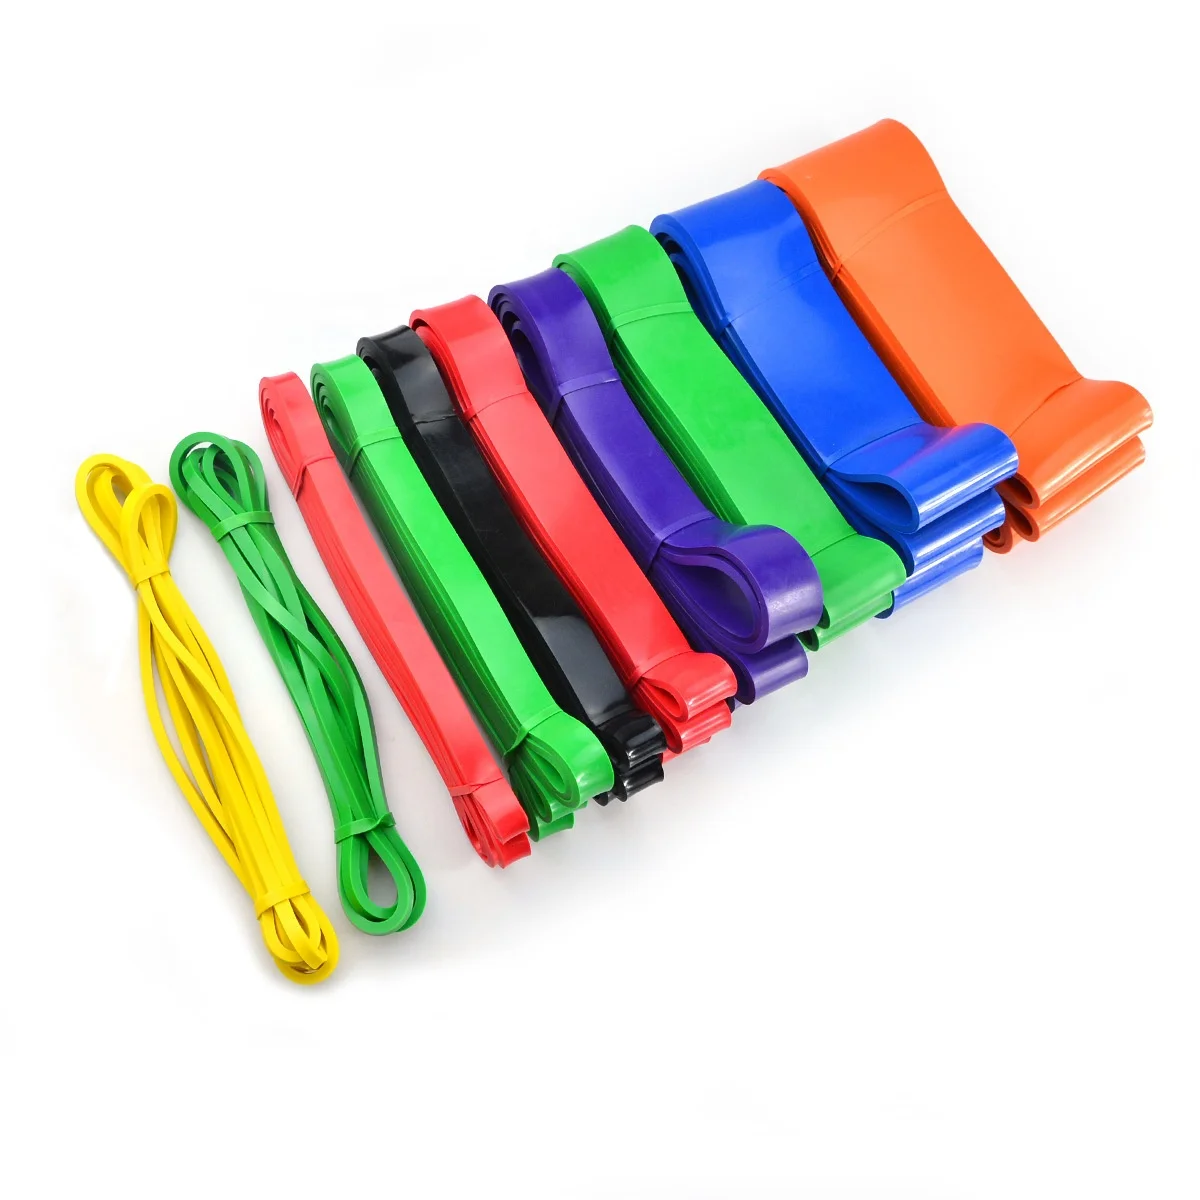 

SPORTS Workout Bands Pull up Resistance and Assist Bands, Pink,blue,green,yellow,purple etc